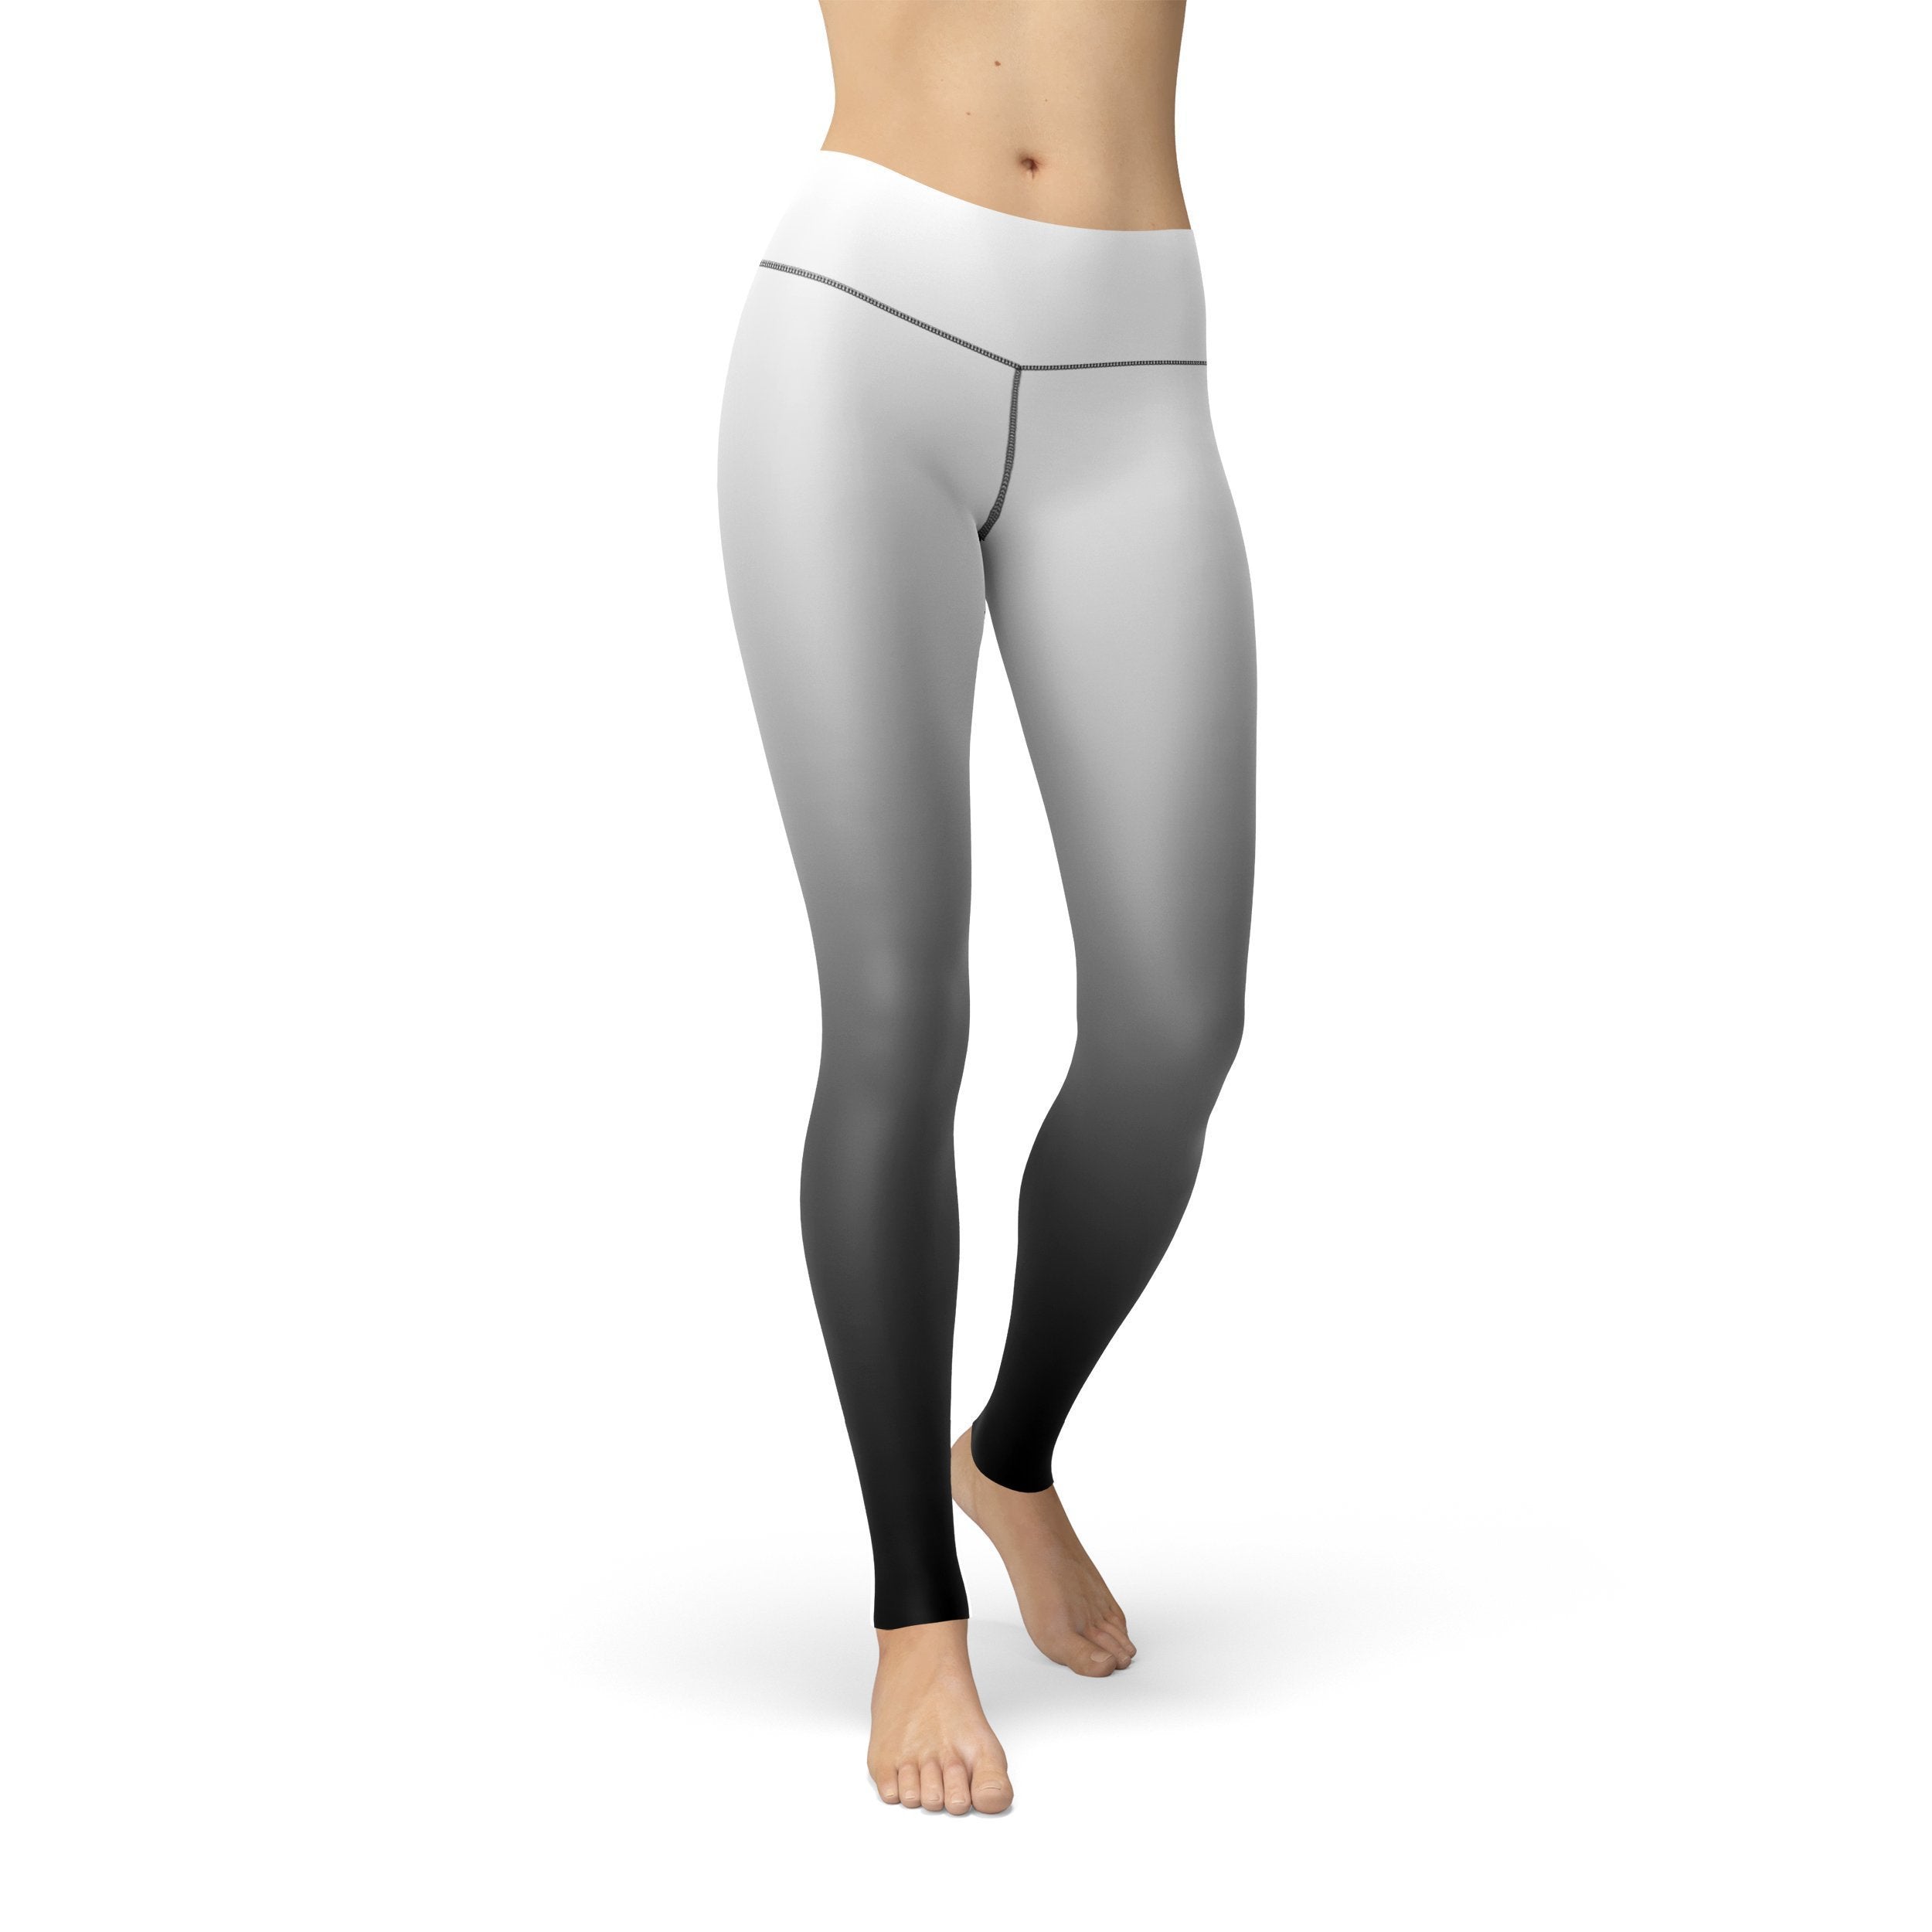 Zyia Active Leggings Womens 8 10 Black Grey White Ombré Pebbled